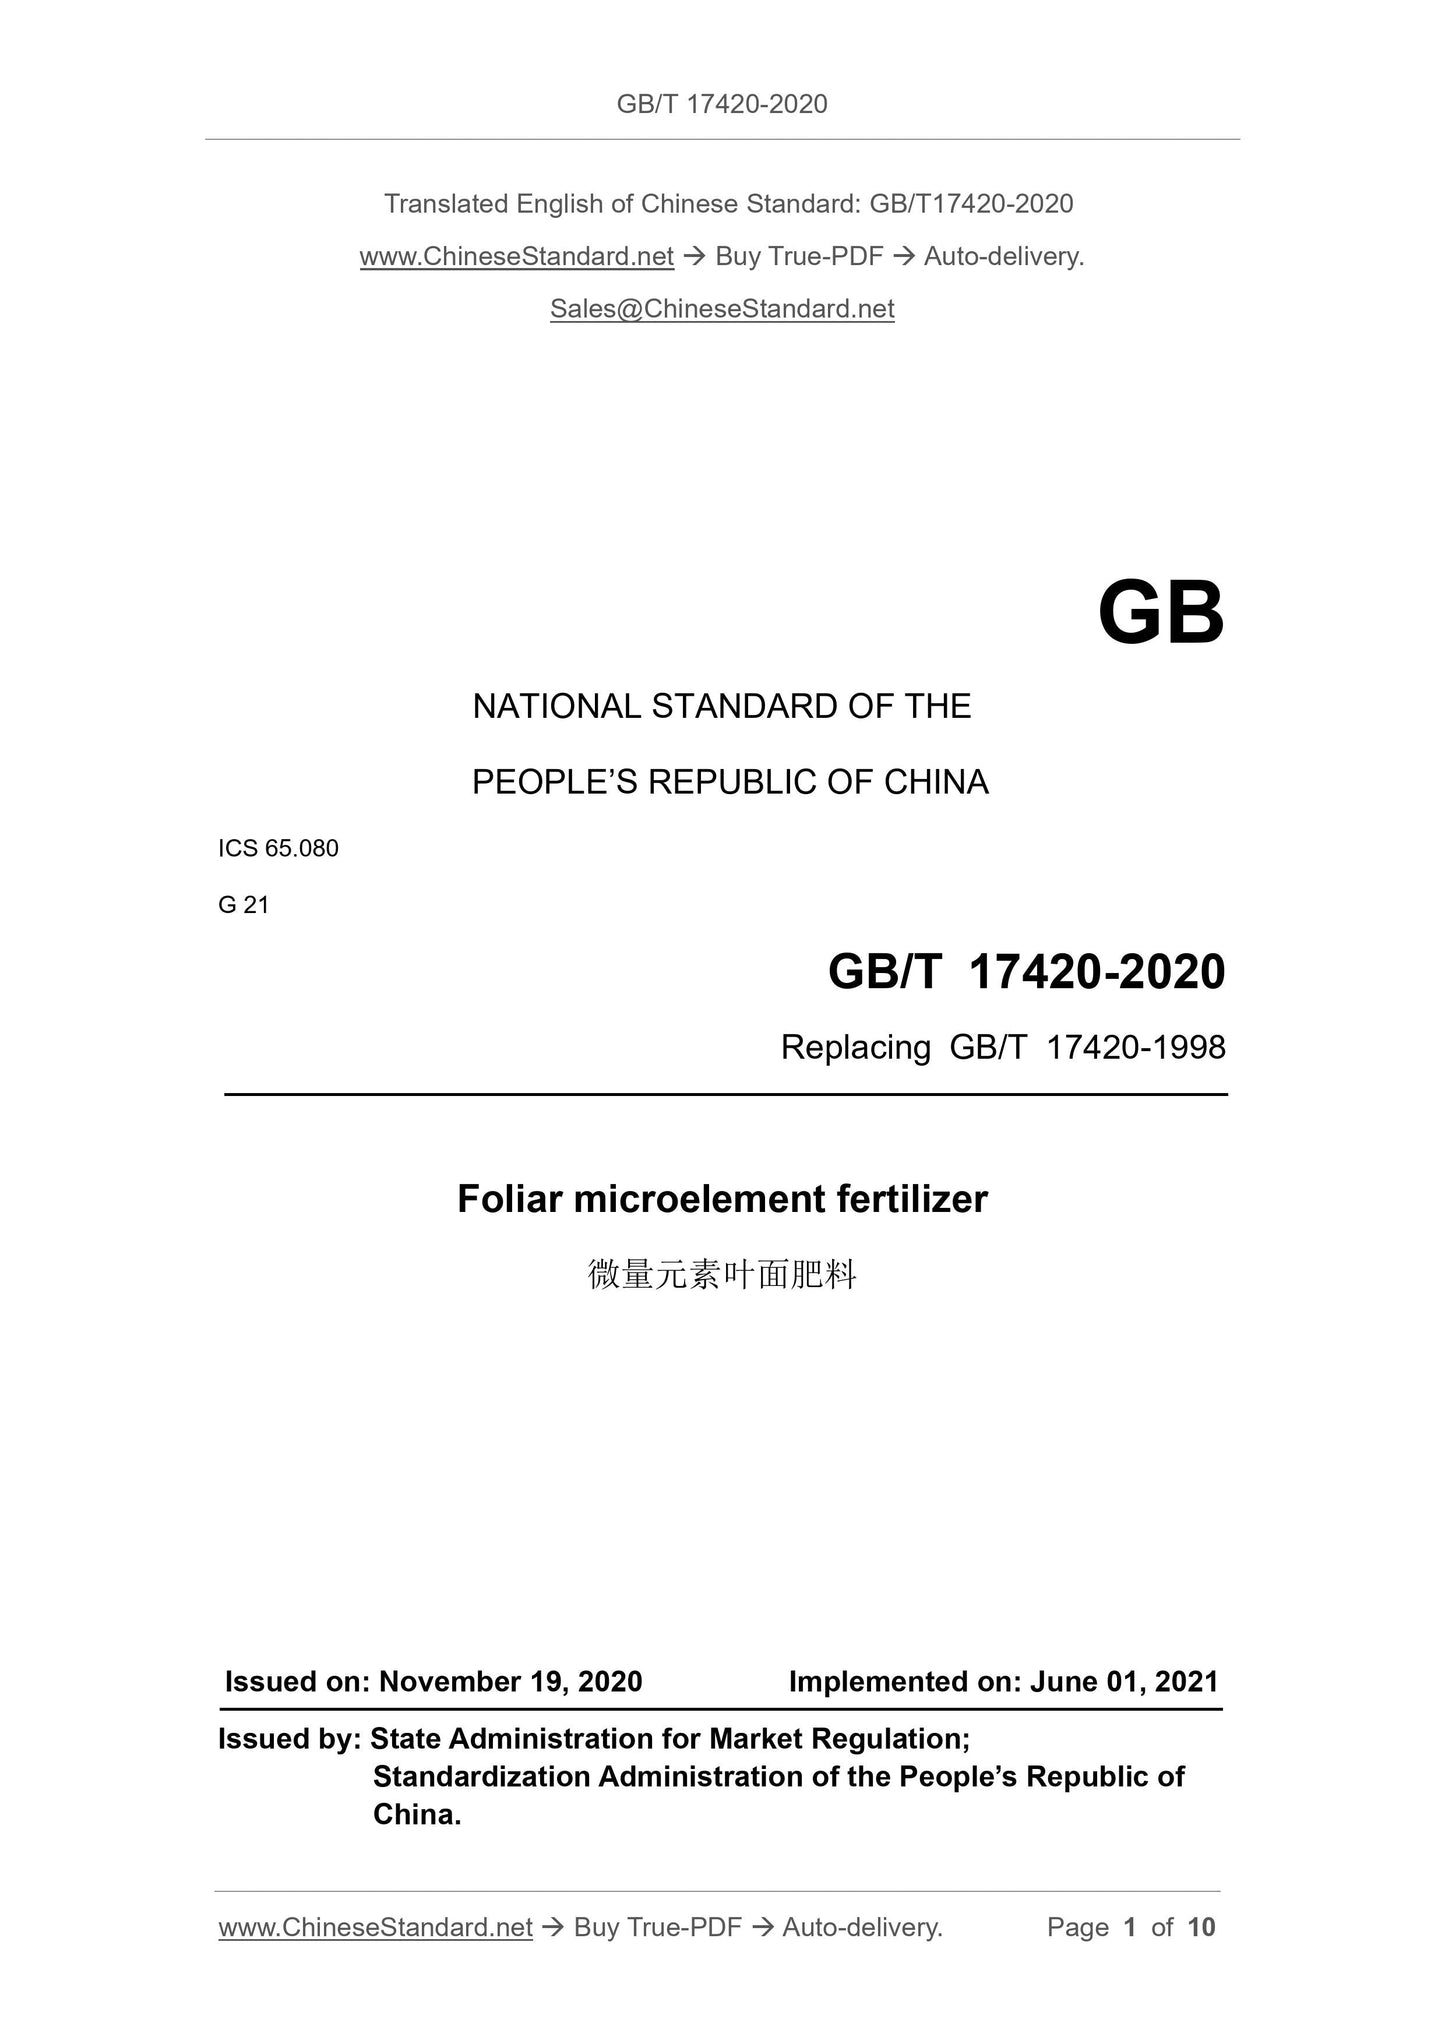 GB/T 17420-2020 Page 1